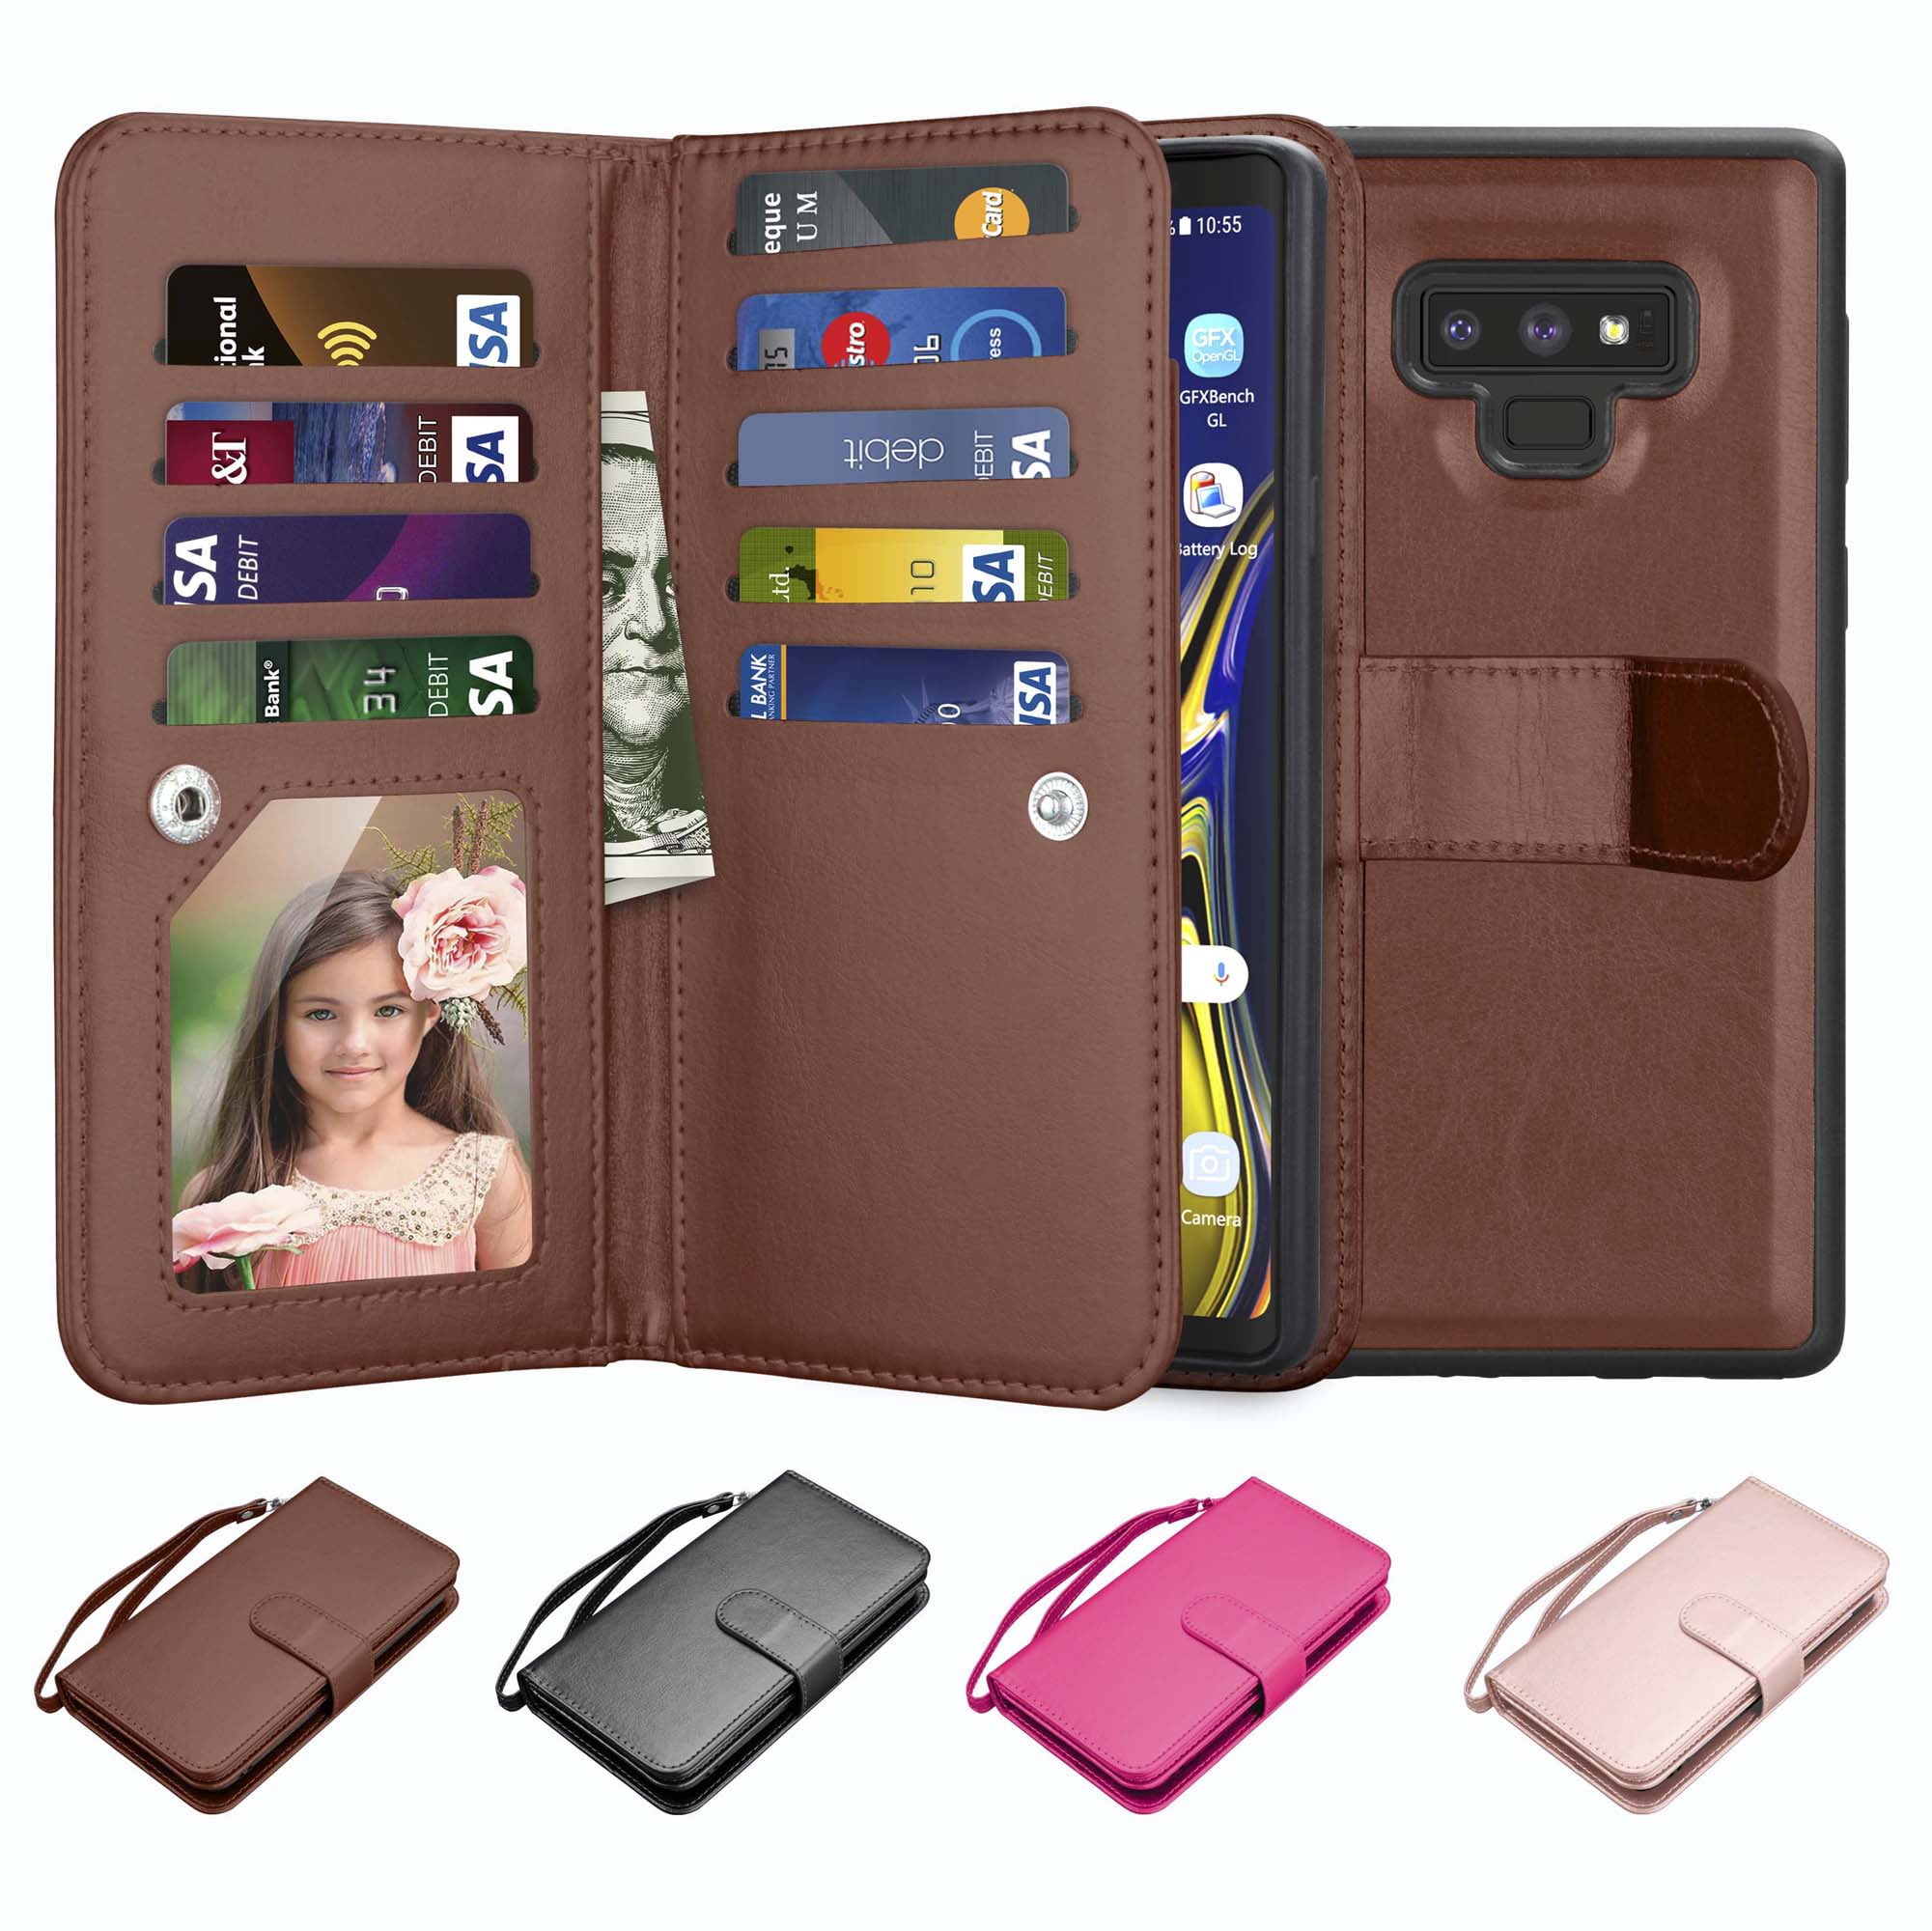 Inside Makeup Mirror Luxurious Romantic Carved Flower for Samsung Galaxy Note 9 2018 Rose Gold WWW Samsung Galaxy Note 9 Case, Card Holder Flip Leather Wallet Case with